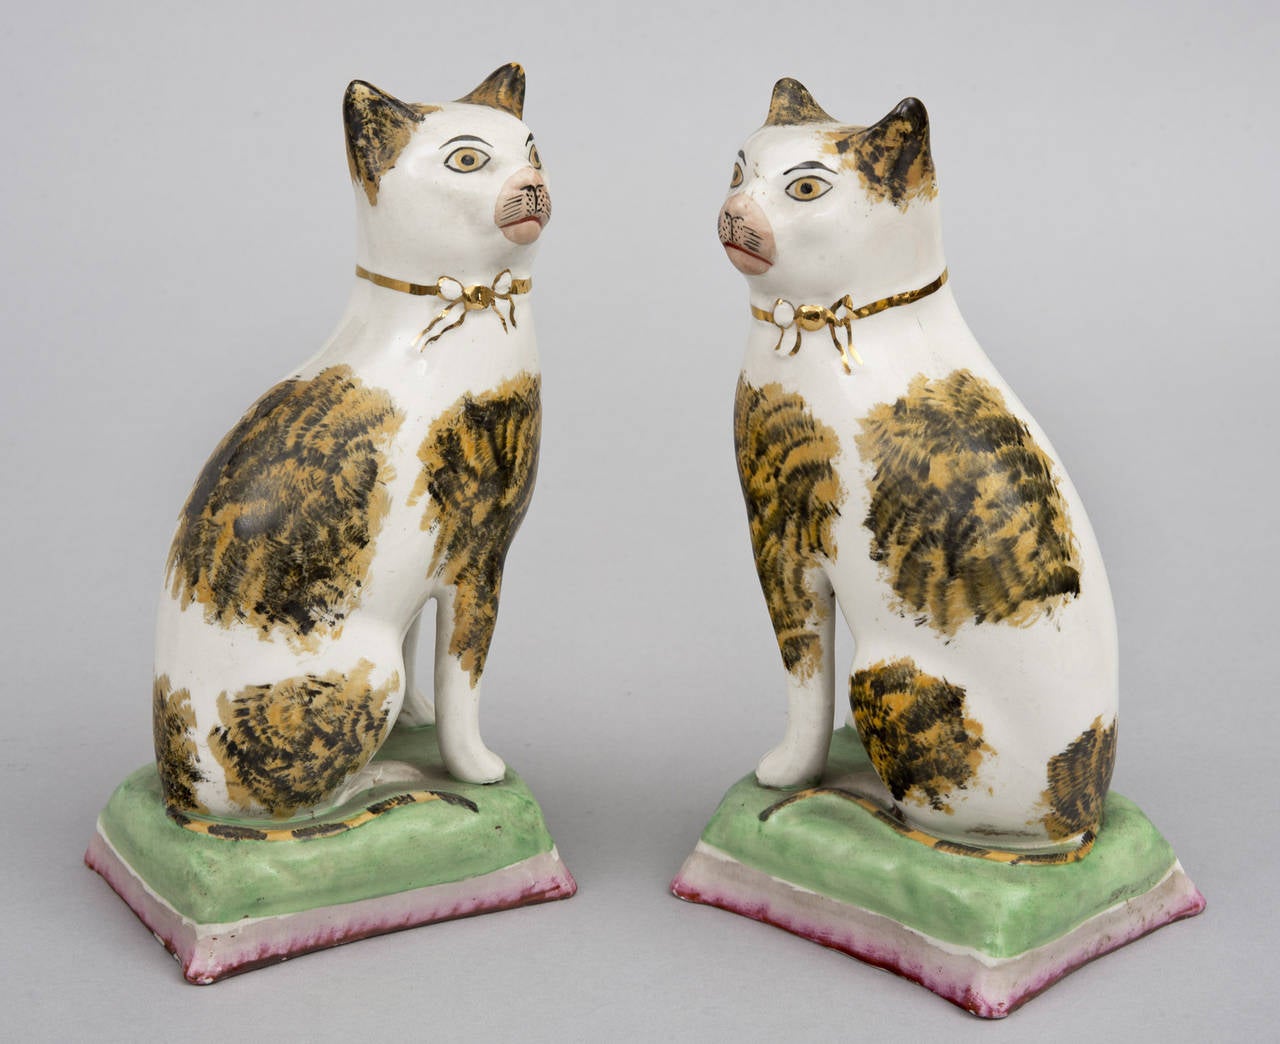 Pair of Staffordshire tabby cats with separate legs, pink nose, gilded ribbon around its neck, black and golden sponge decoration, sitting on a green and pink cushion.

Item #7183